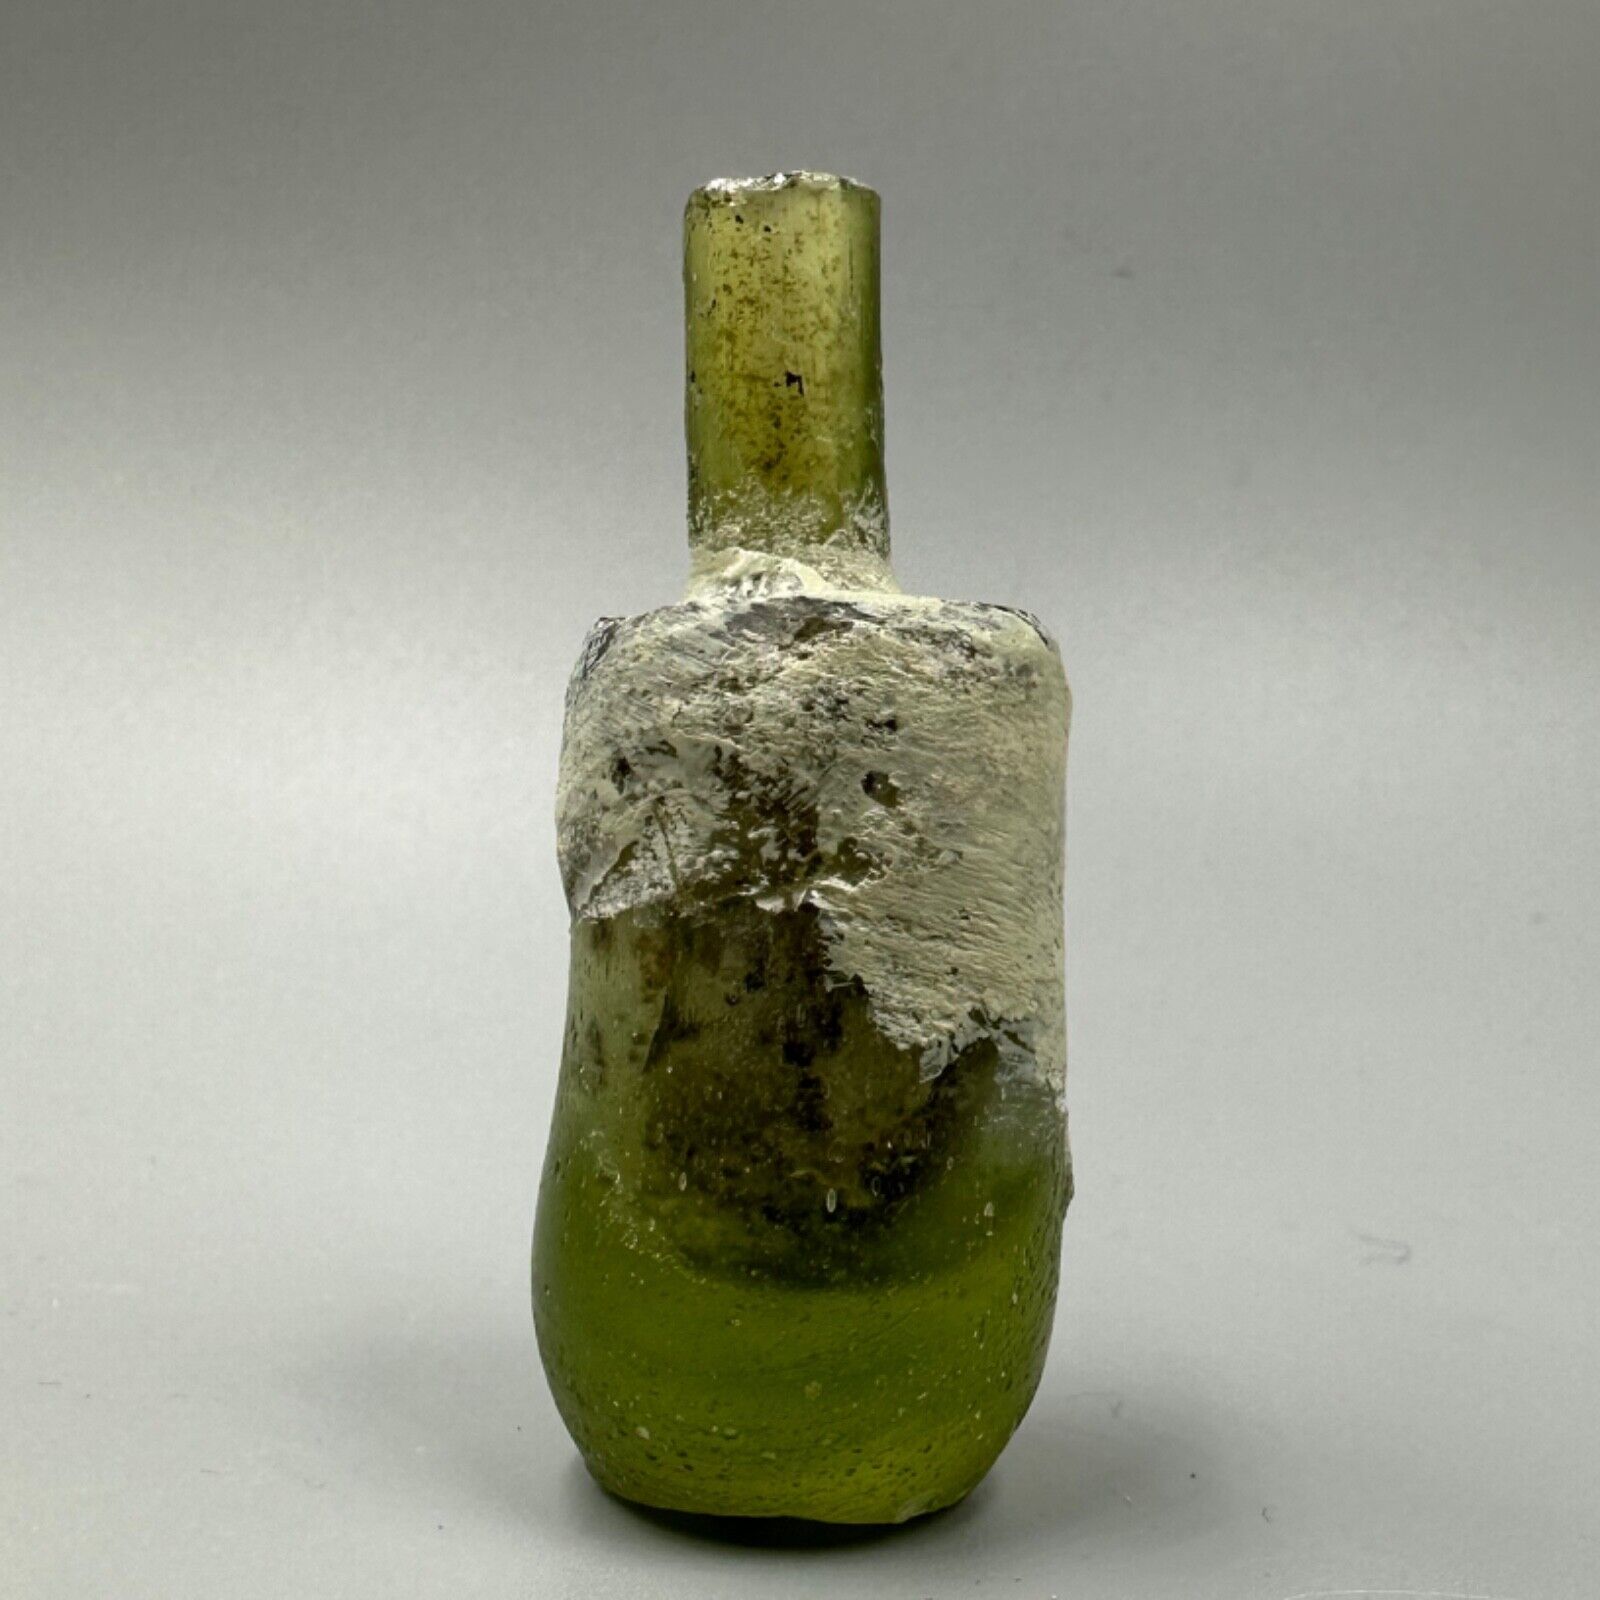 Intact Rare Ancient Old Roman Glass Medical Bottle From North Western Afghanista